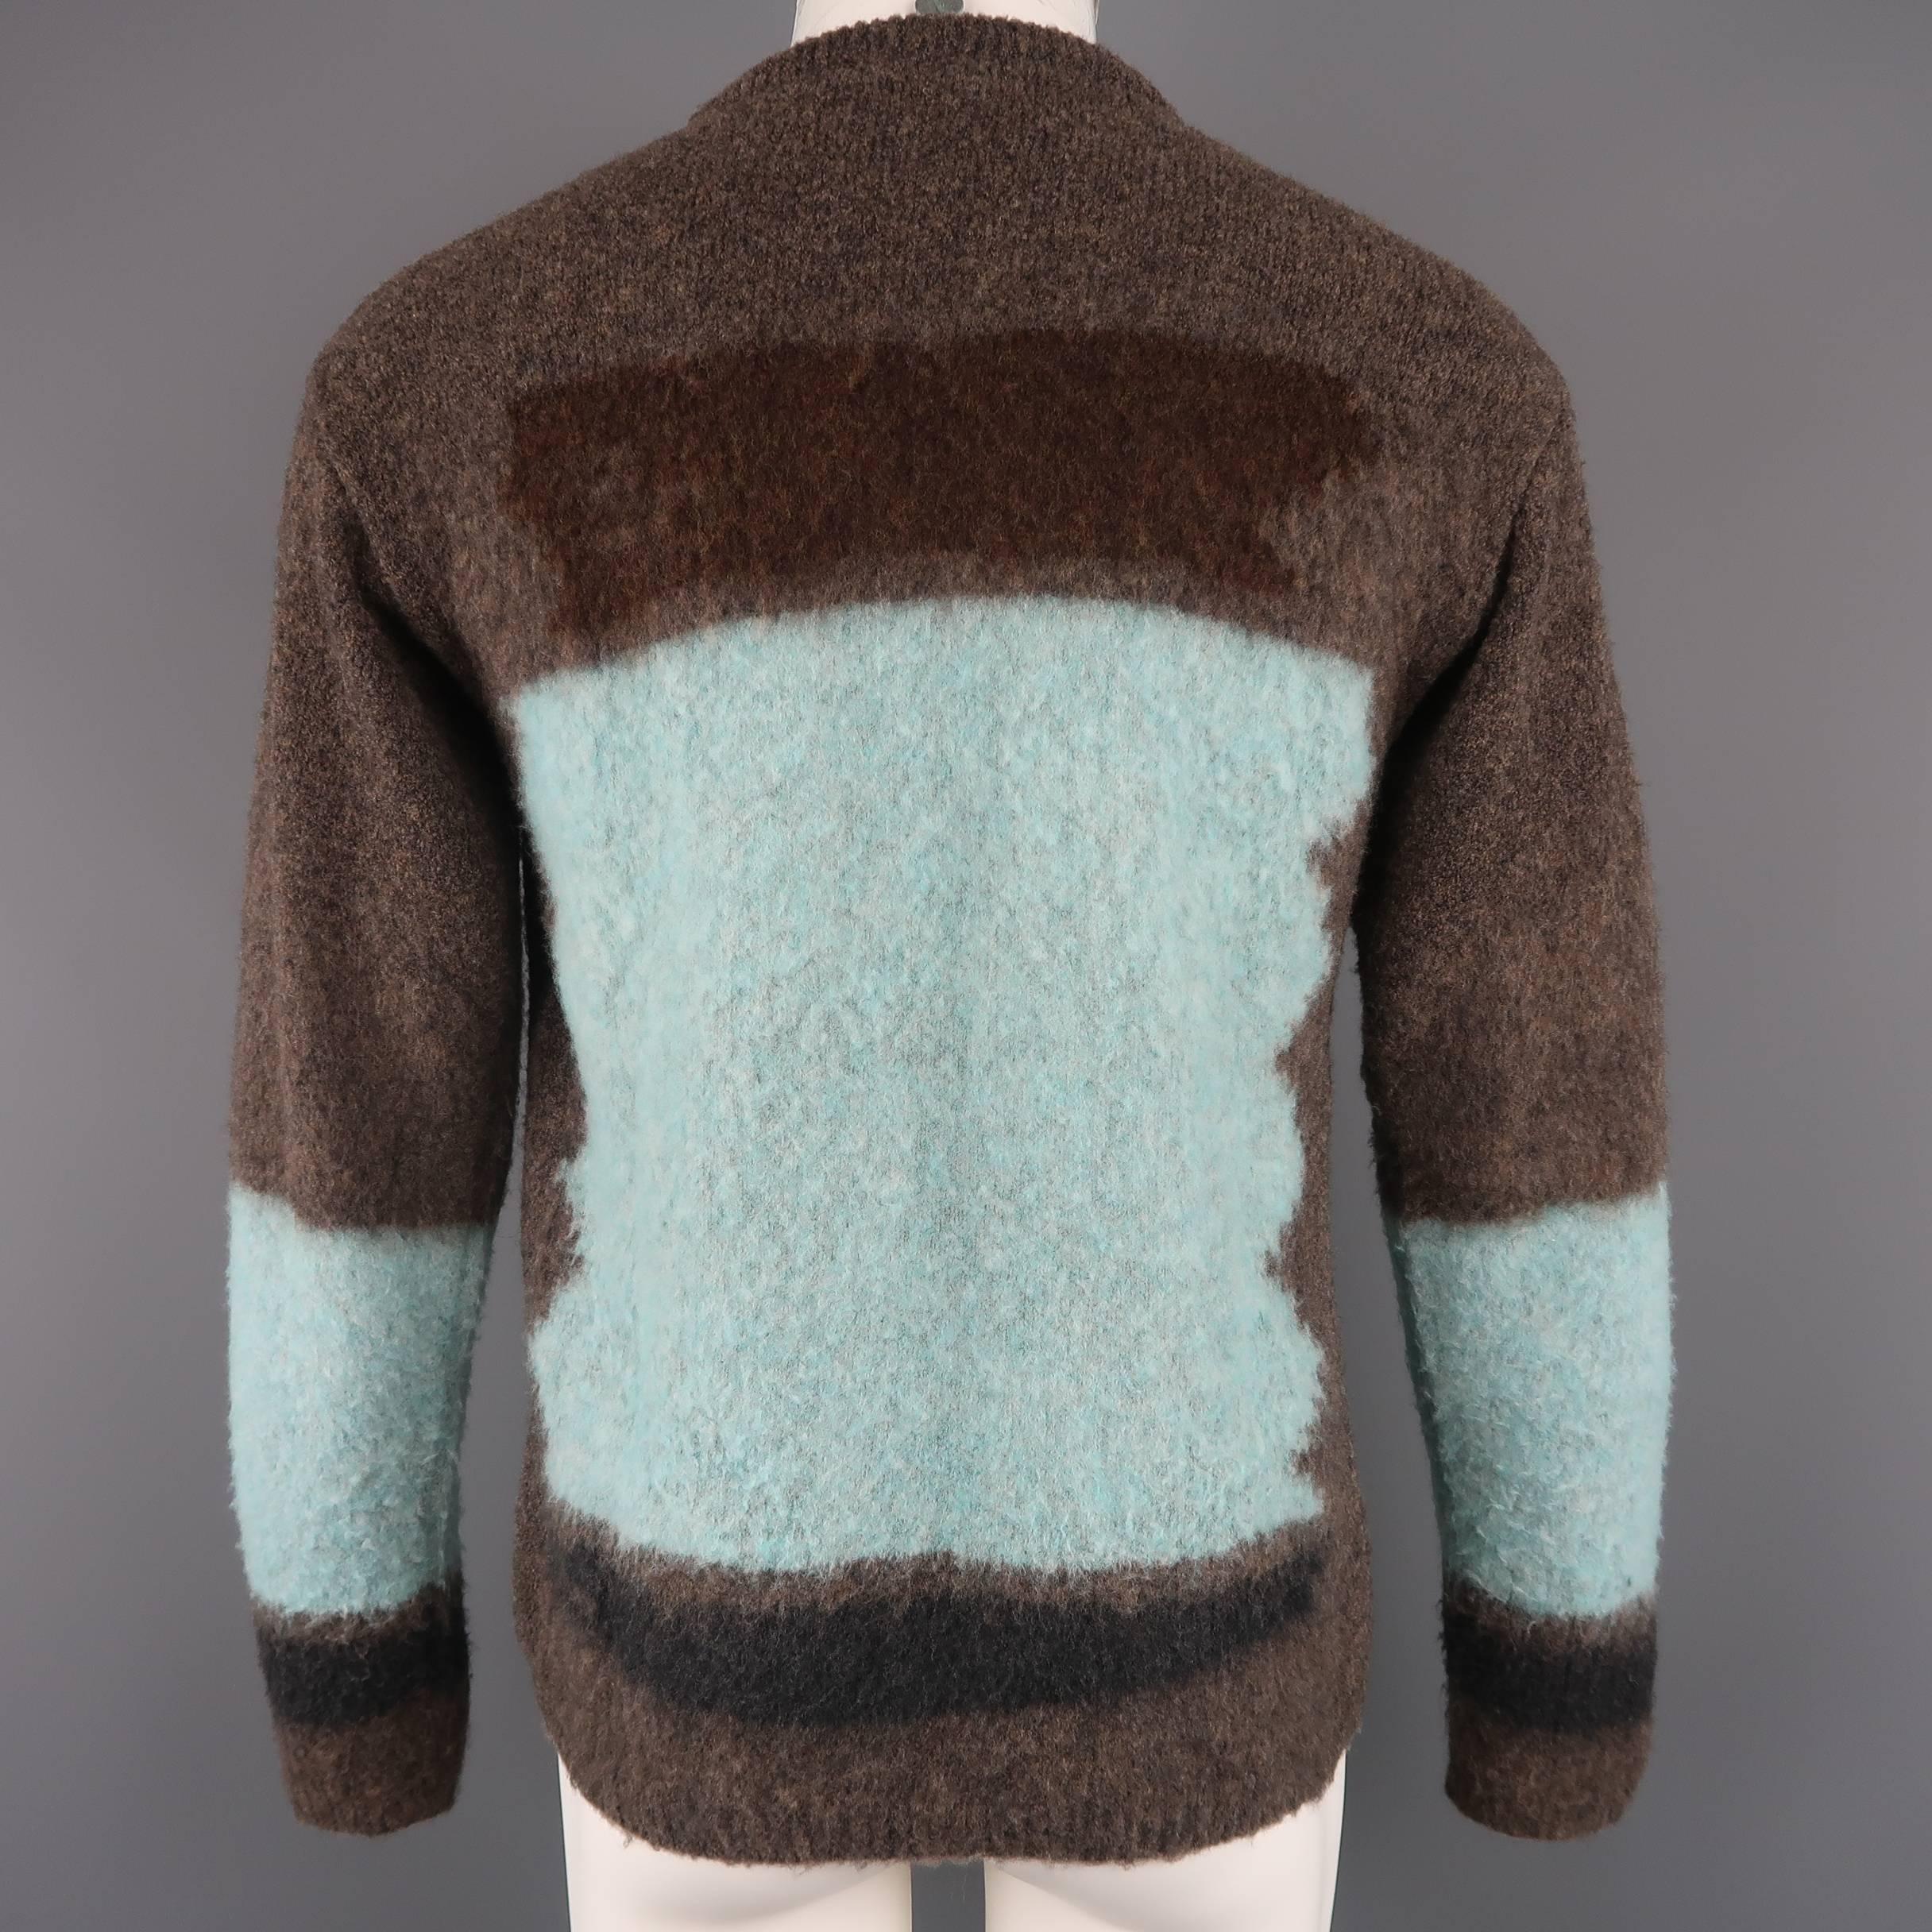 Black Gianni Versace Taupe and Aqua Blue Color Block Textured Pullover Sweater